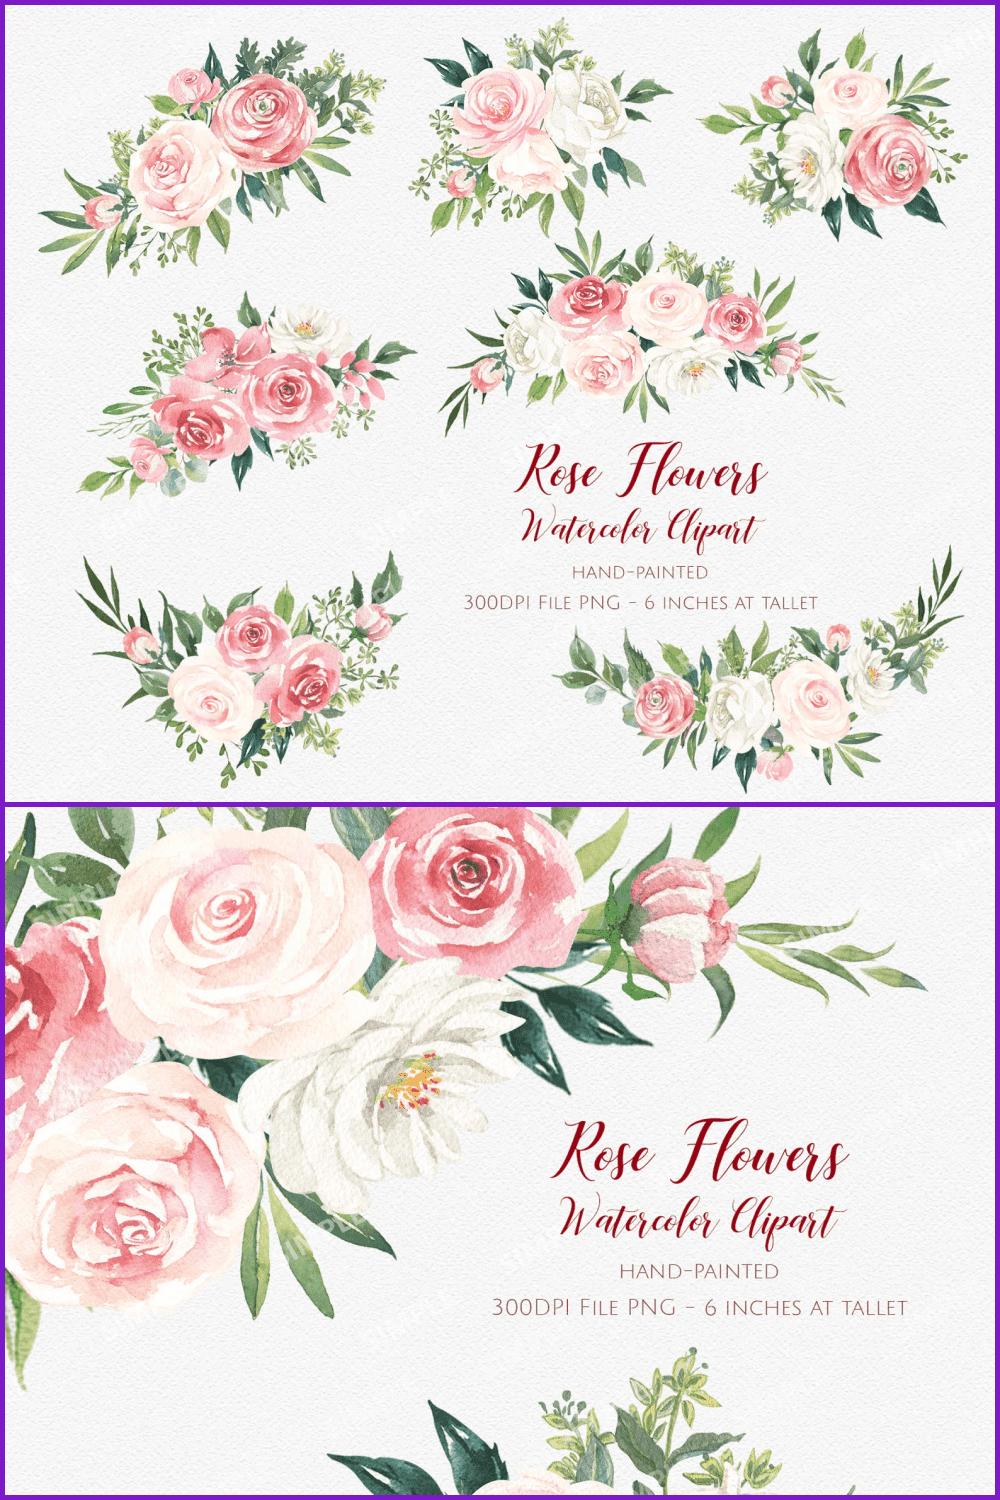 Hand-painted watercolor roses in bouquets.